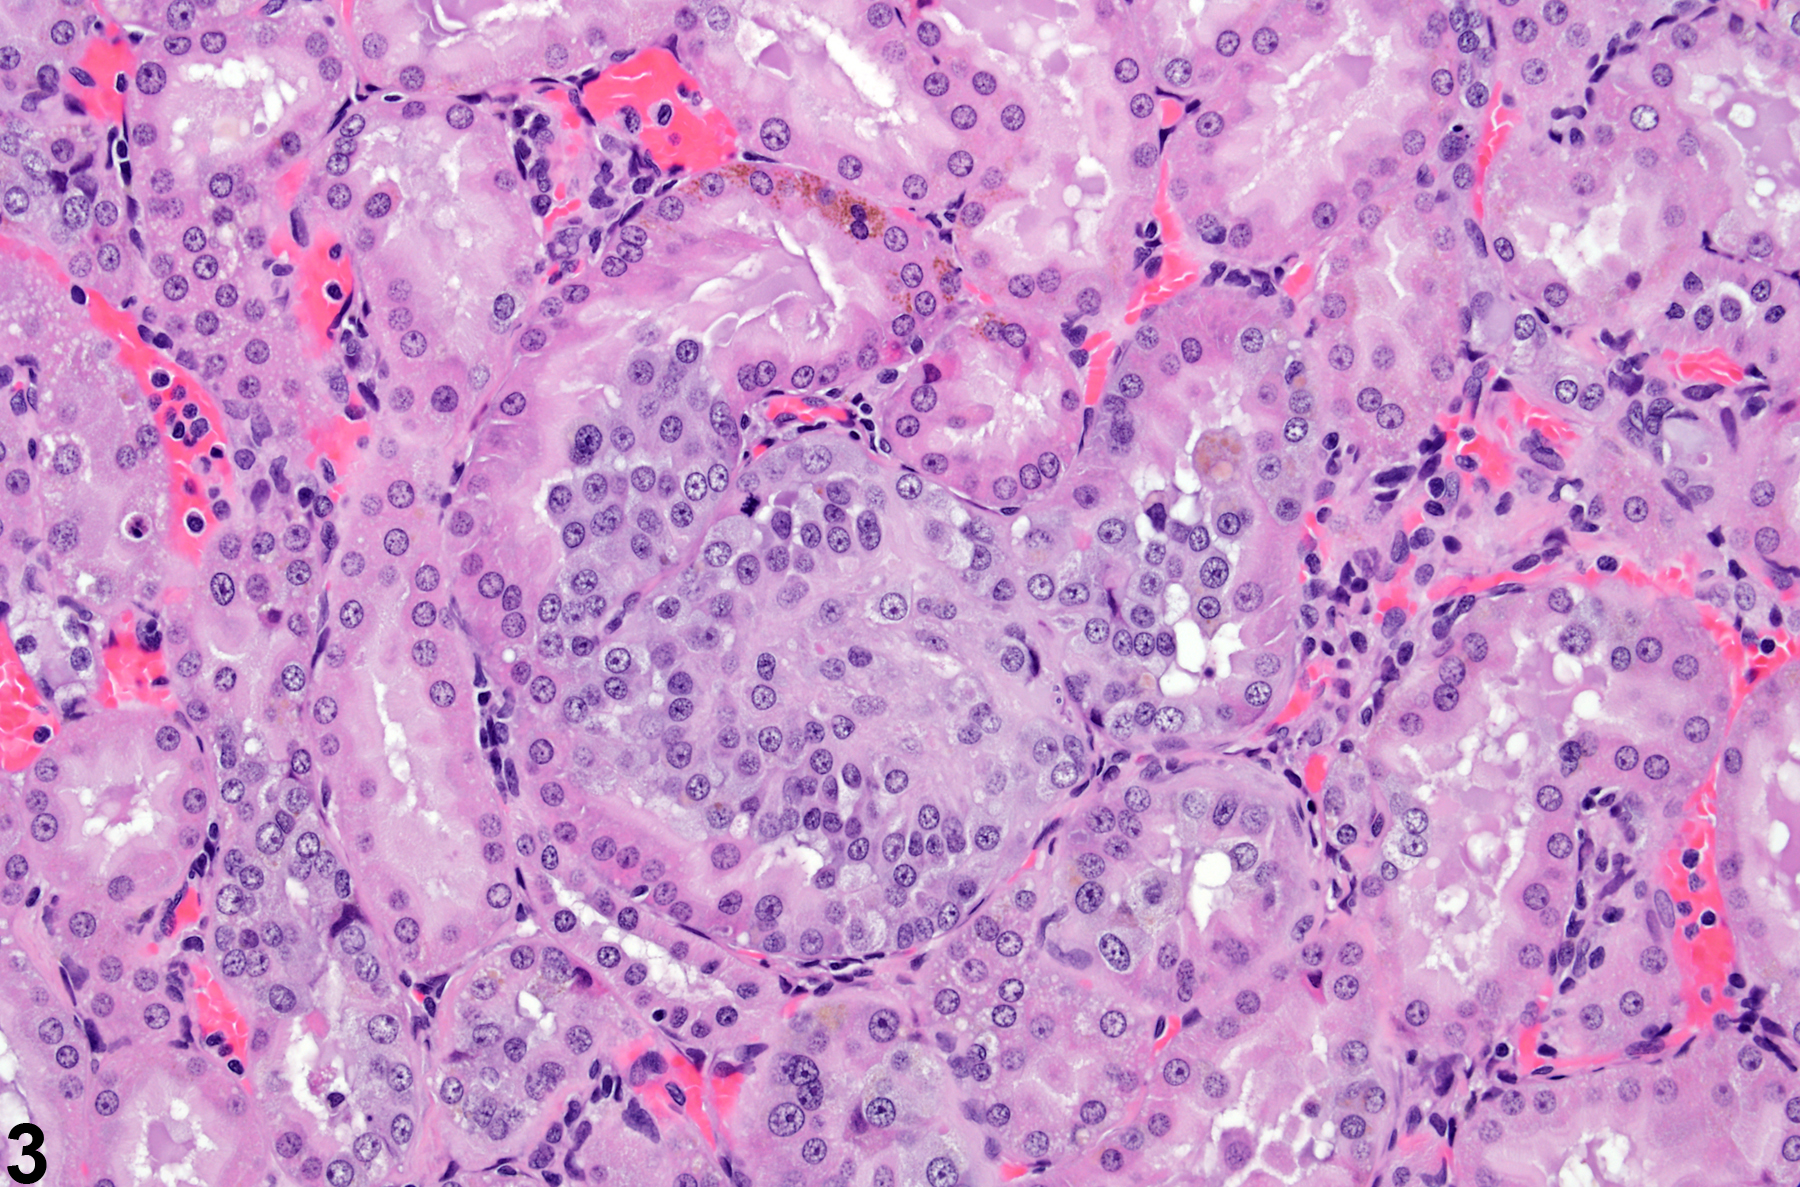 Image of renal tubule epithelium atypical tubule hyperplasia in the kidney from a female F344/N rat in a chronic study